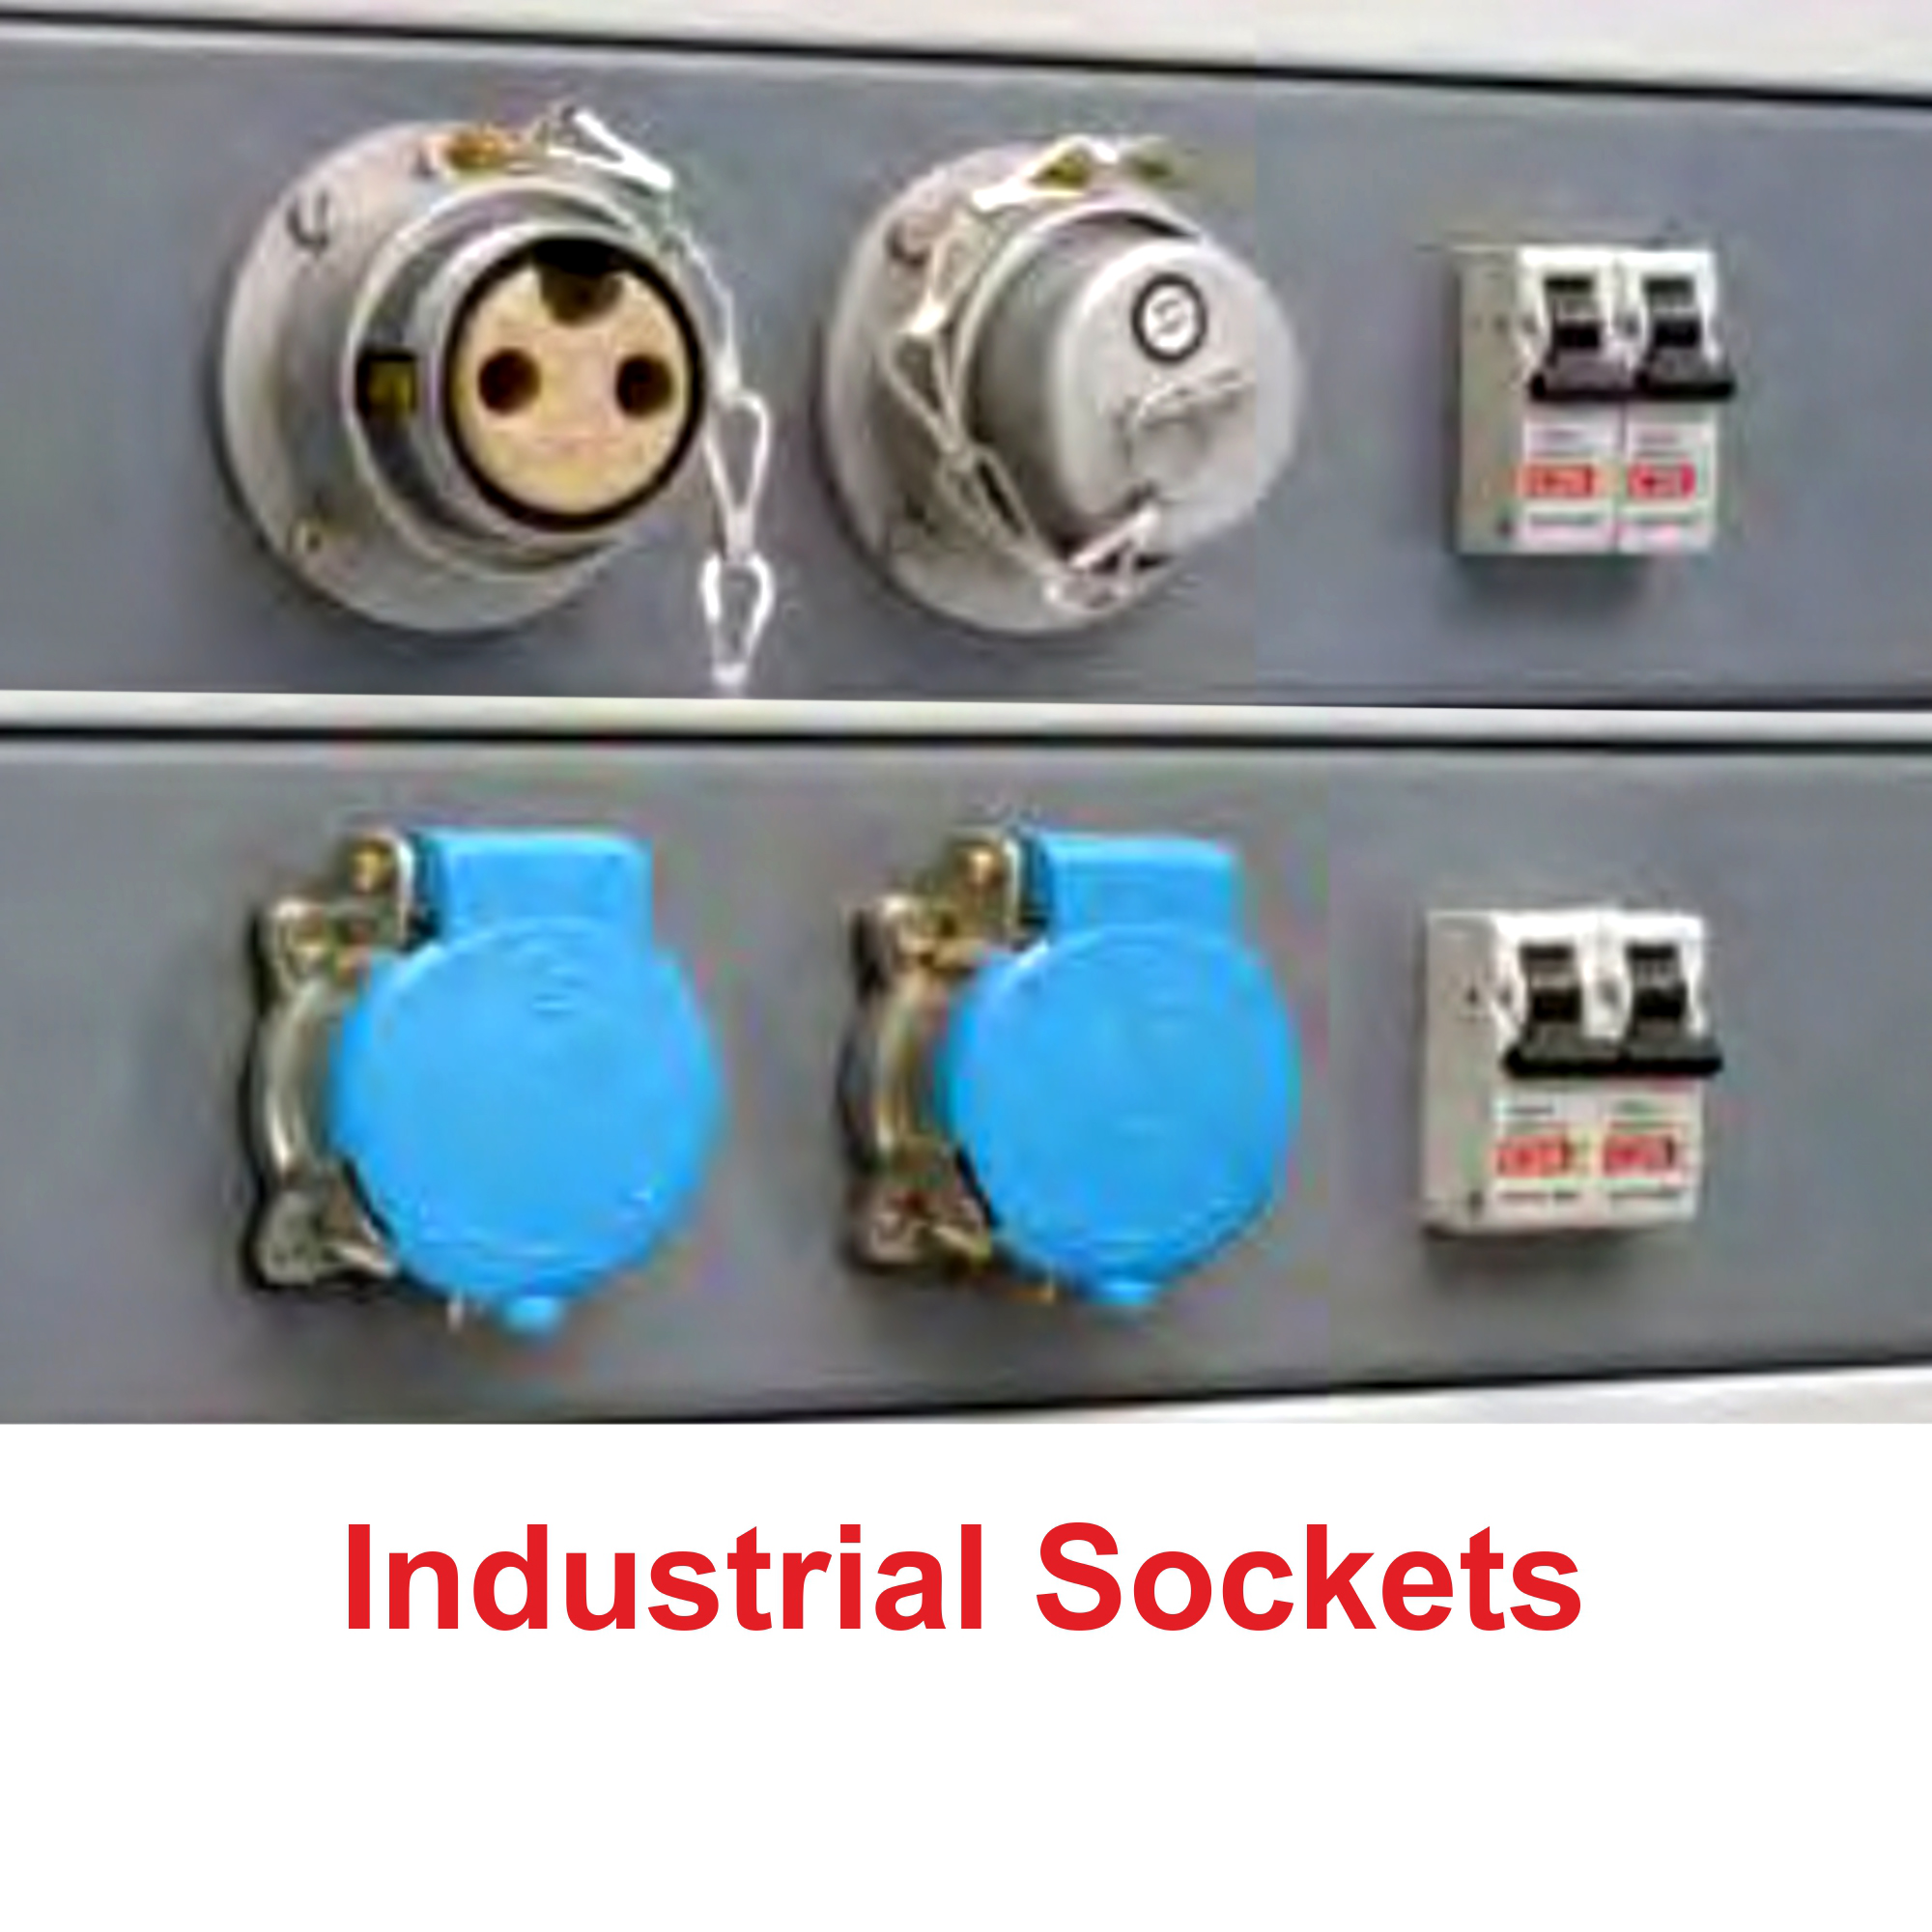 Industrial Sockets Manufacturer in India